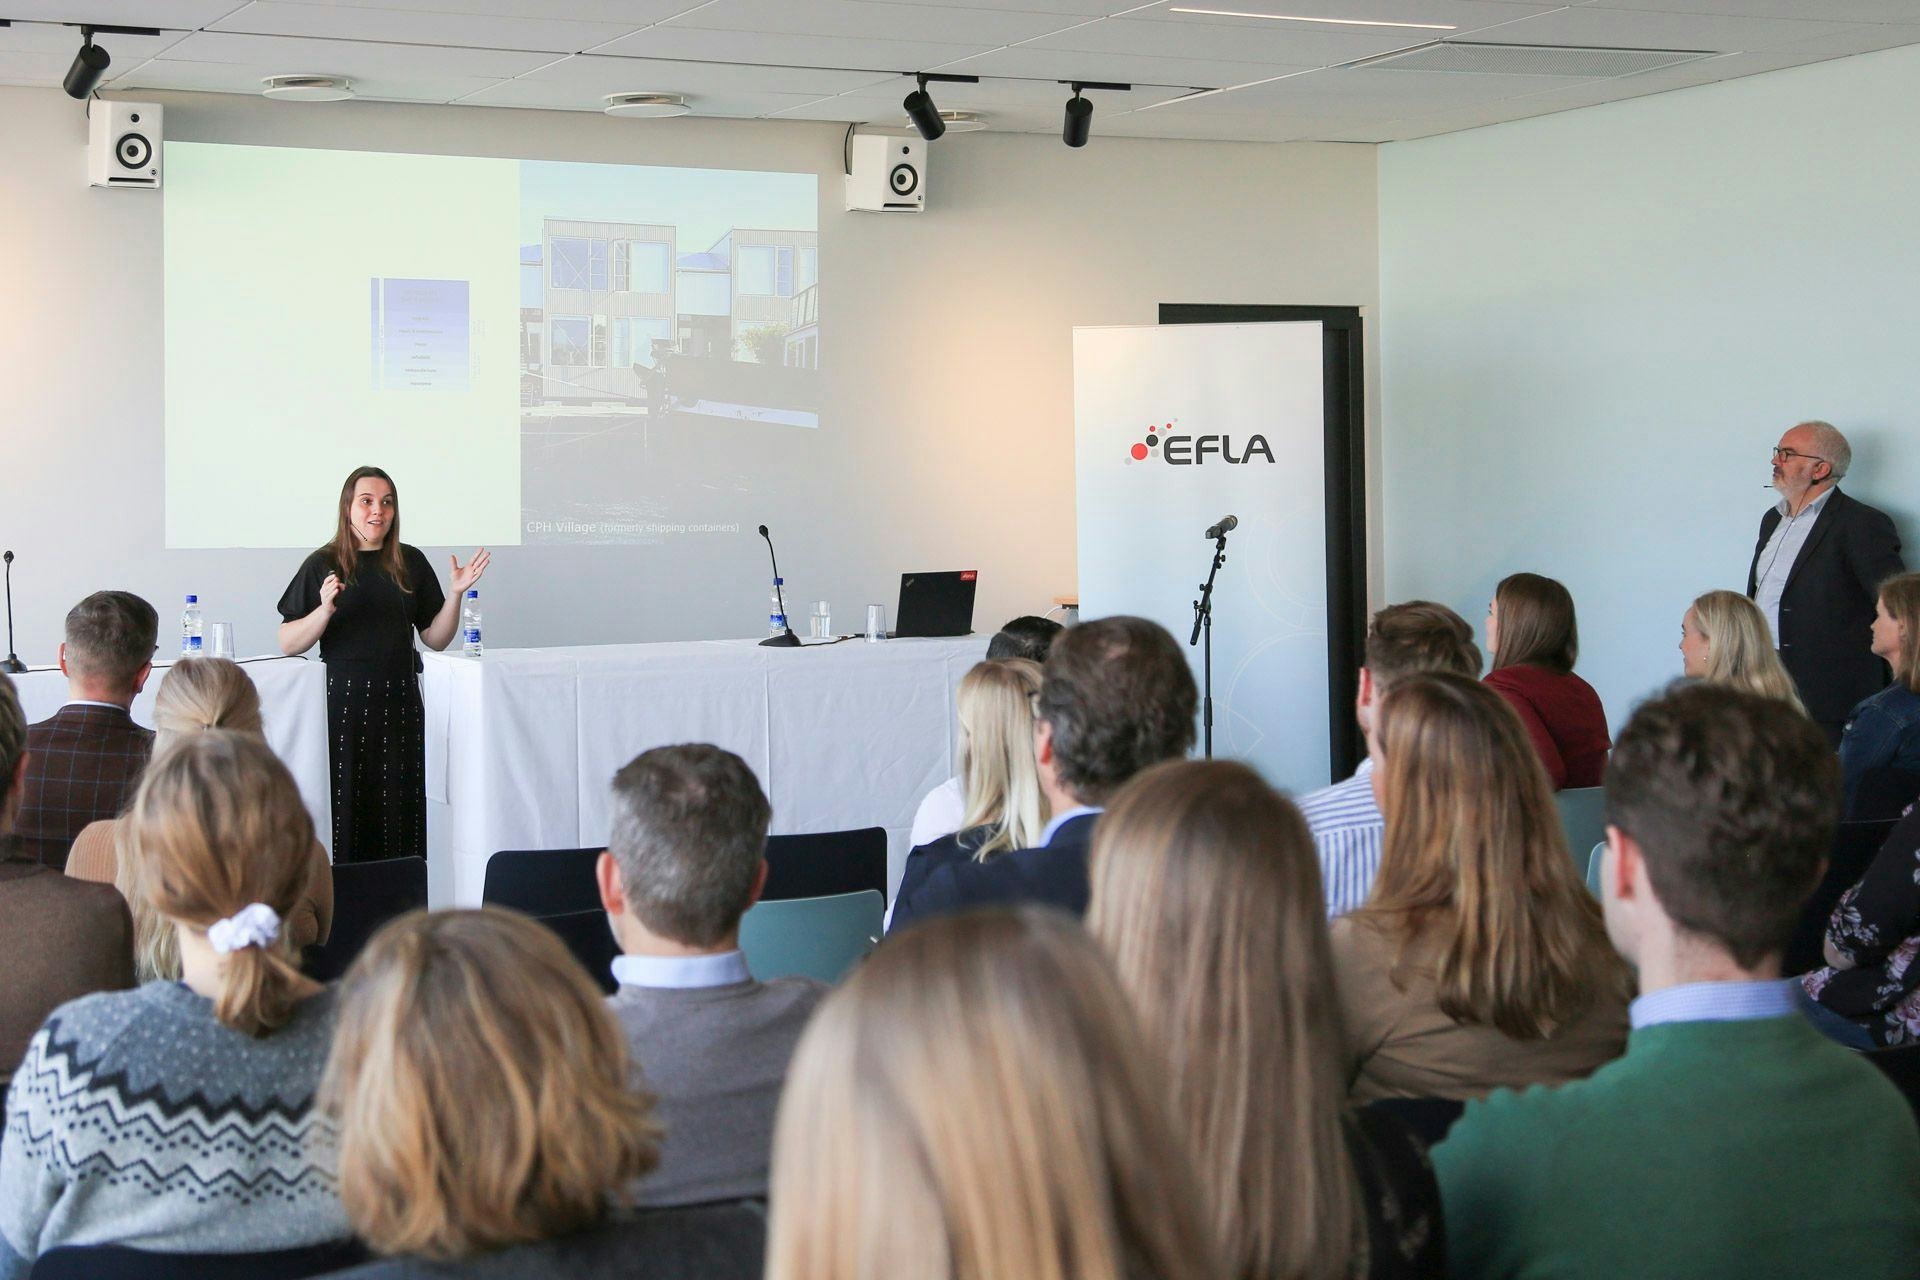 An audience listening to a speaker at a conference or presentation with the "EFLA" banner and a big screen in the background